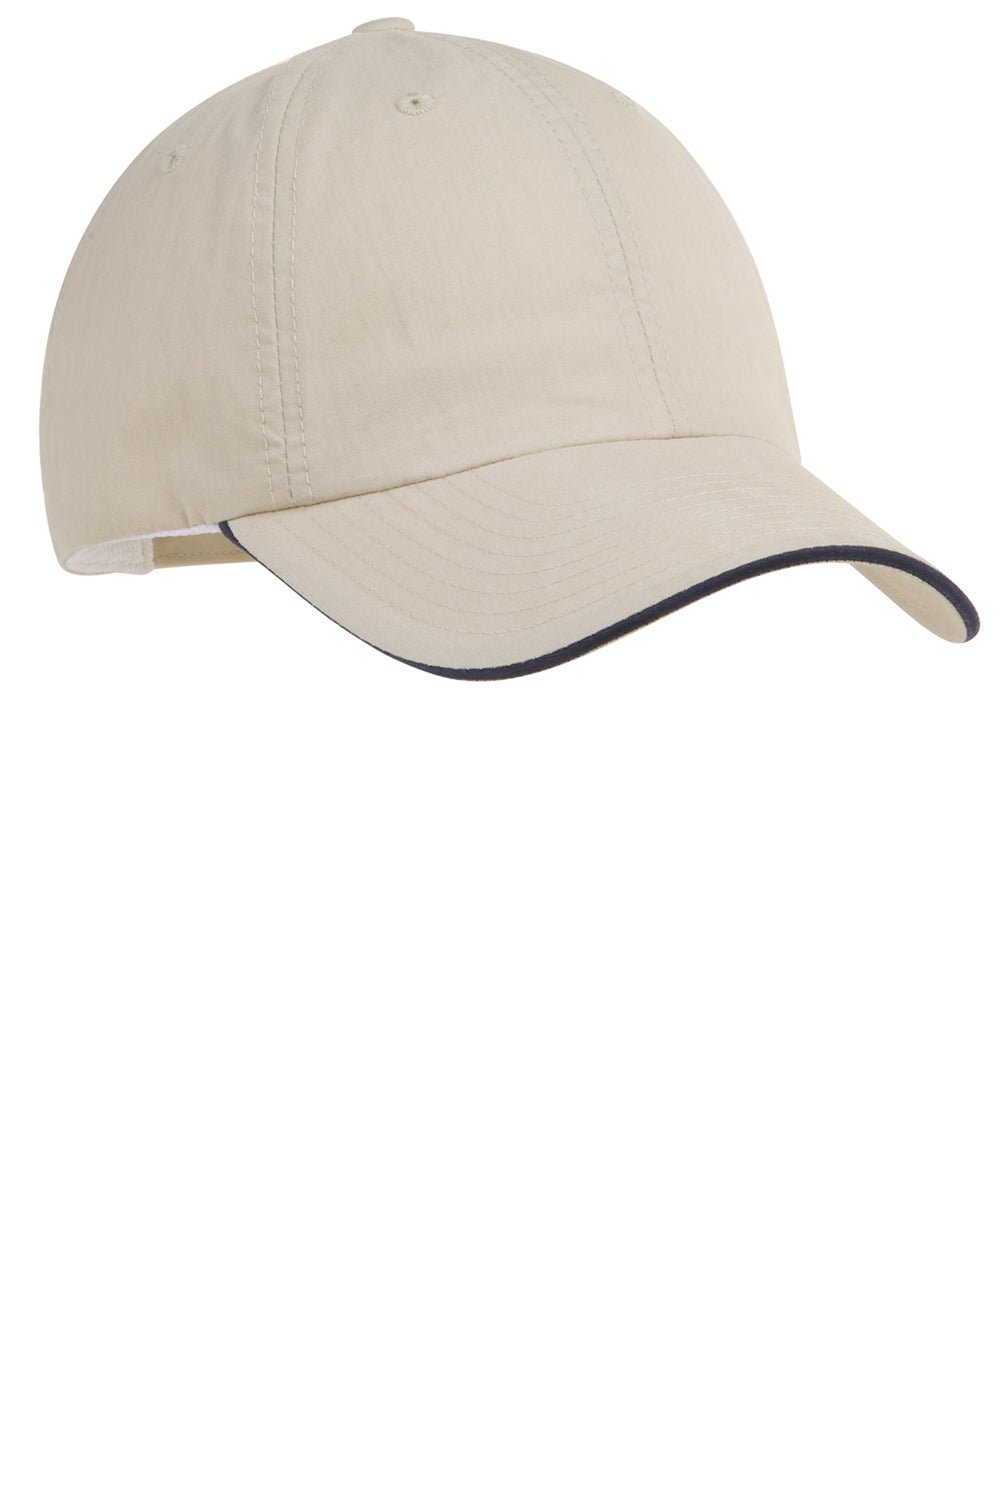 Port Authority C852 Mens Cool Max Moisture Wicking Adjustable Hat Beige Front